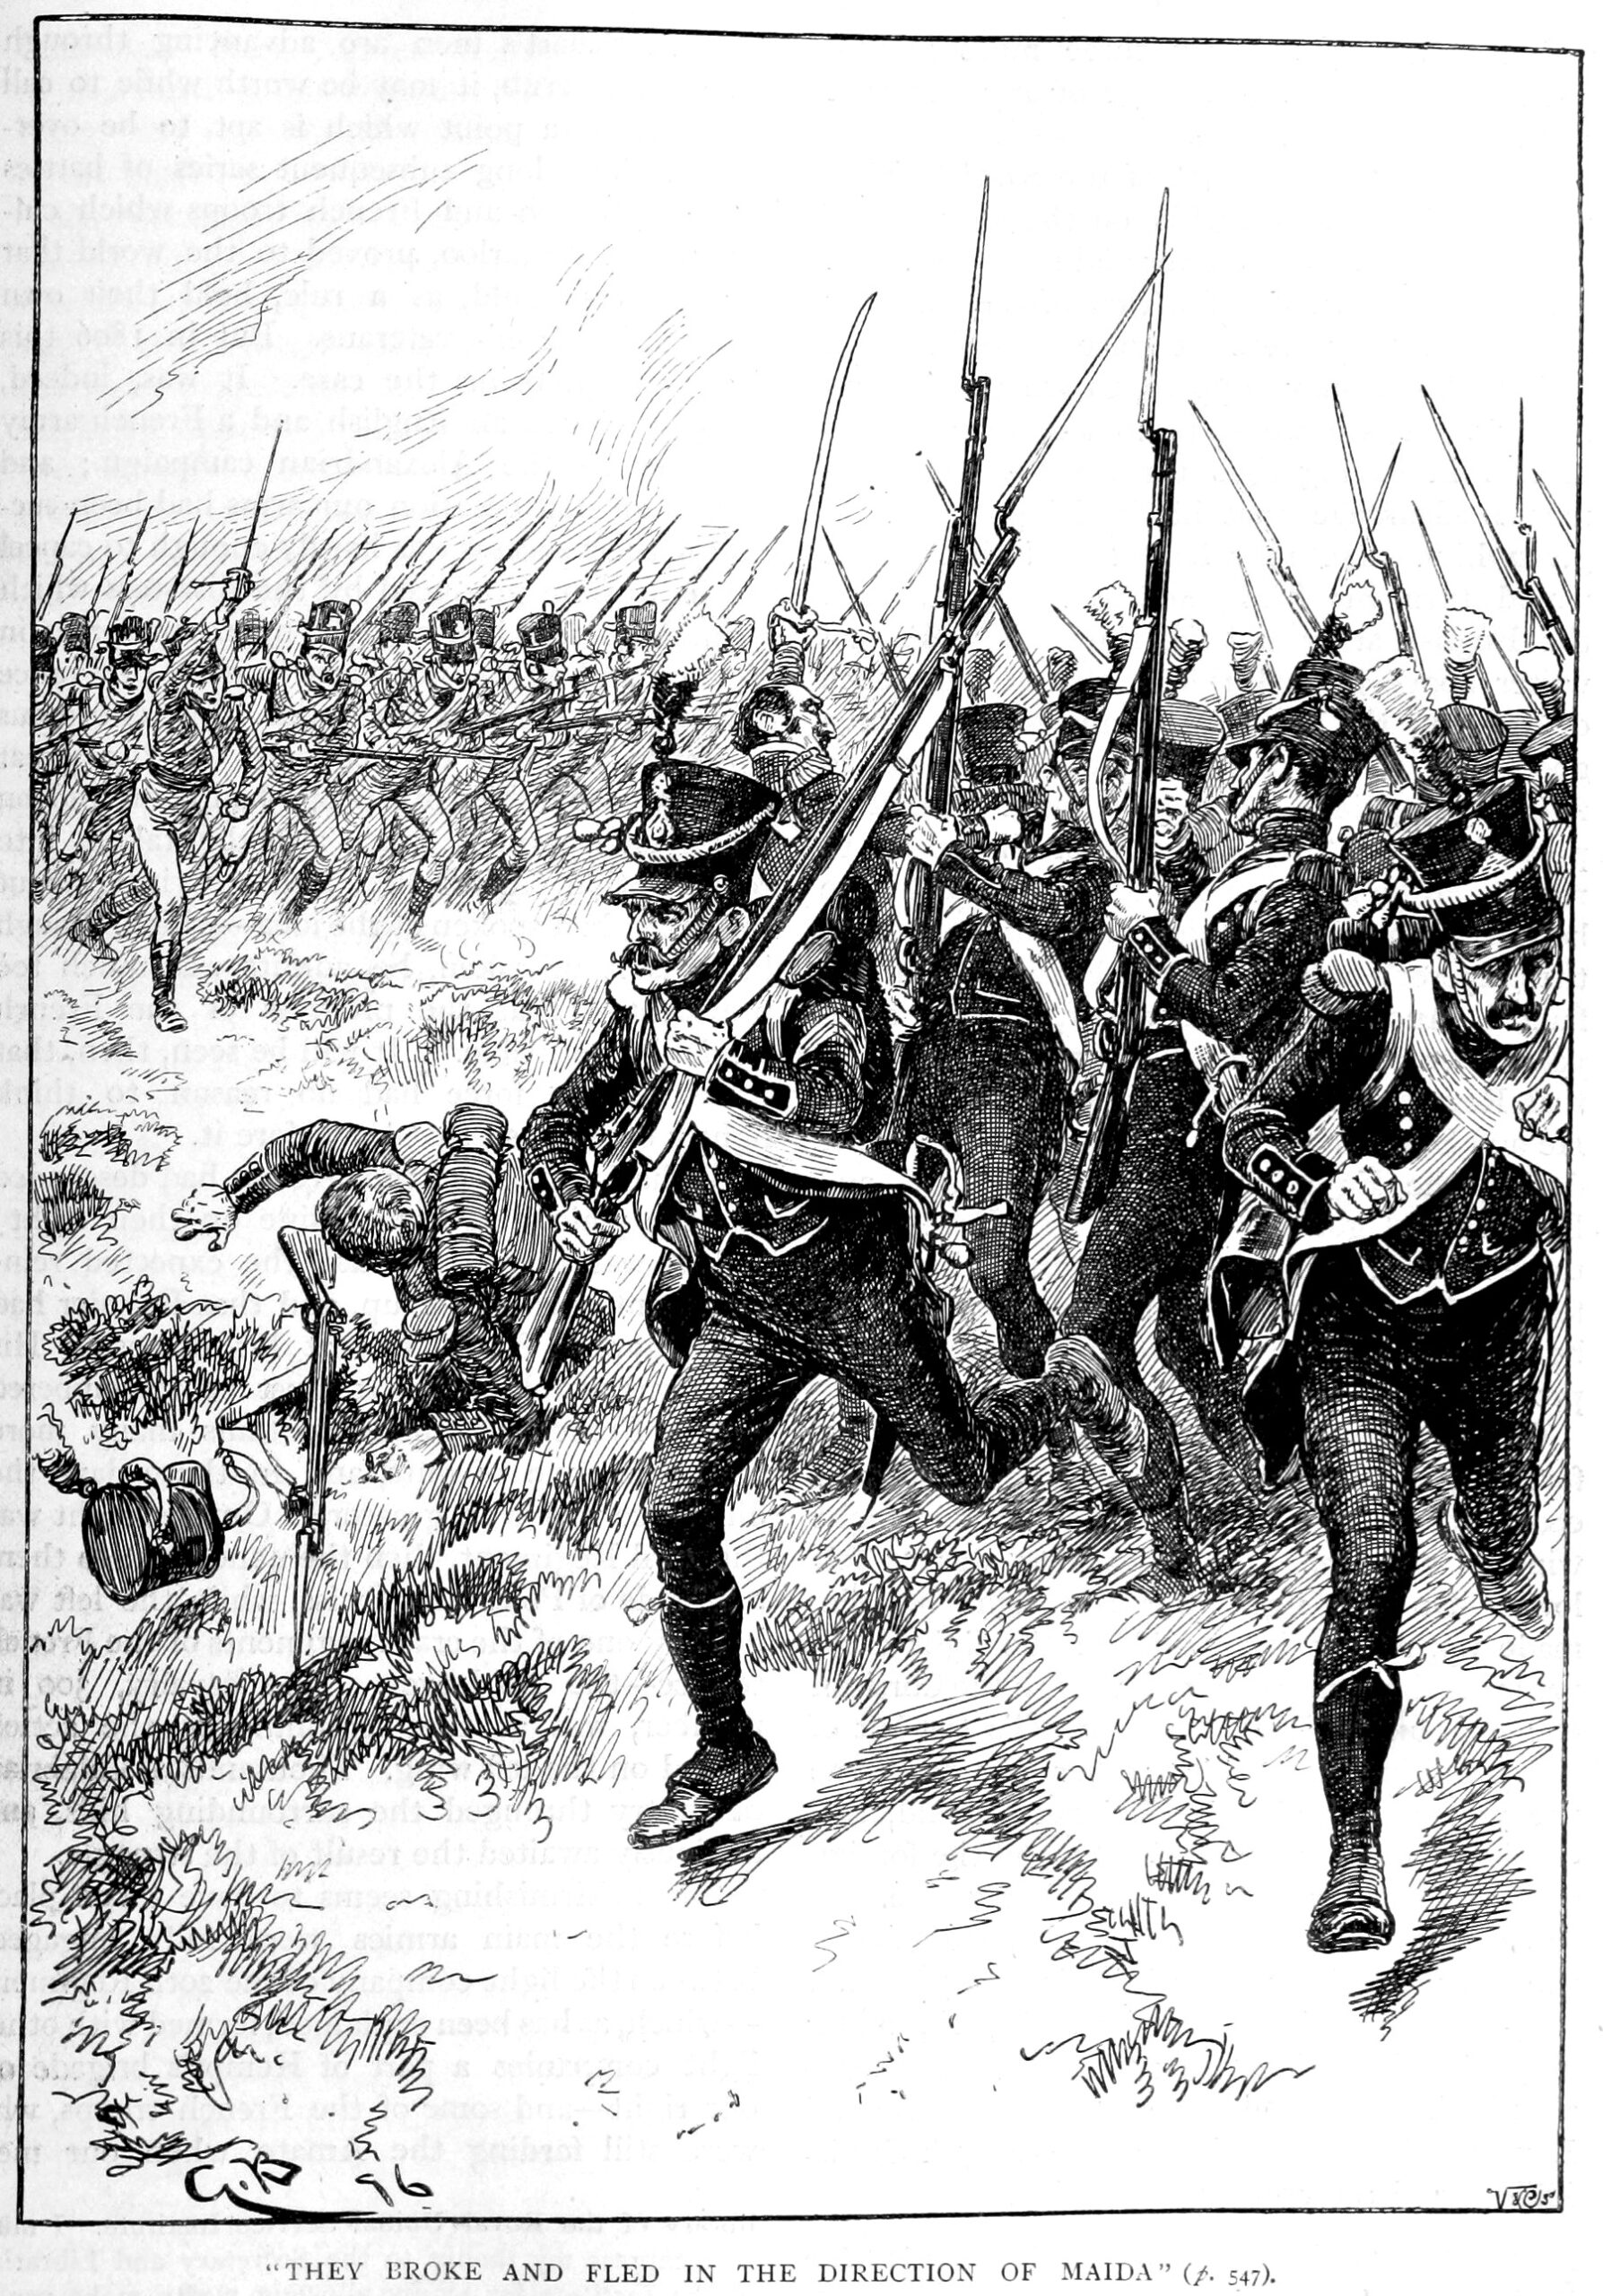 Lieutenant Colonel James Kempt’s British troops give cold steel to visibly shaken soldiers of the French 1st Light Infantry Regiment.